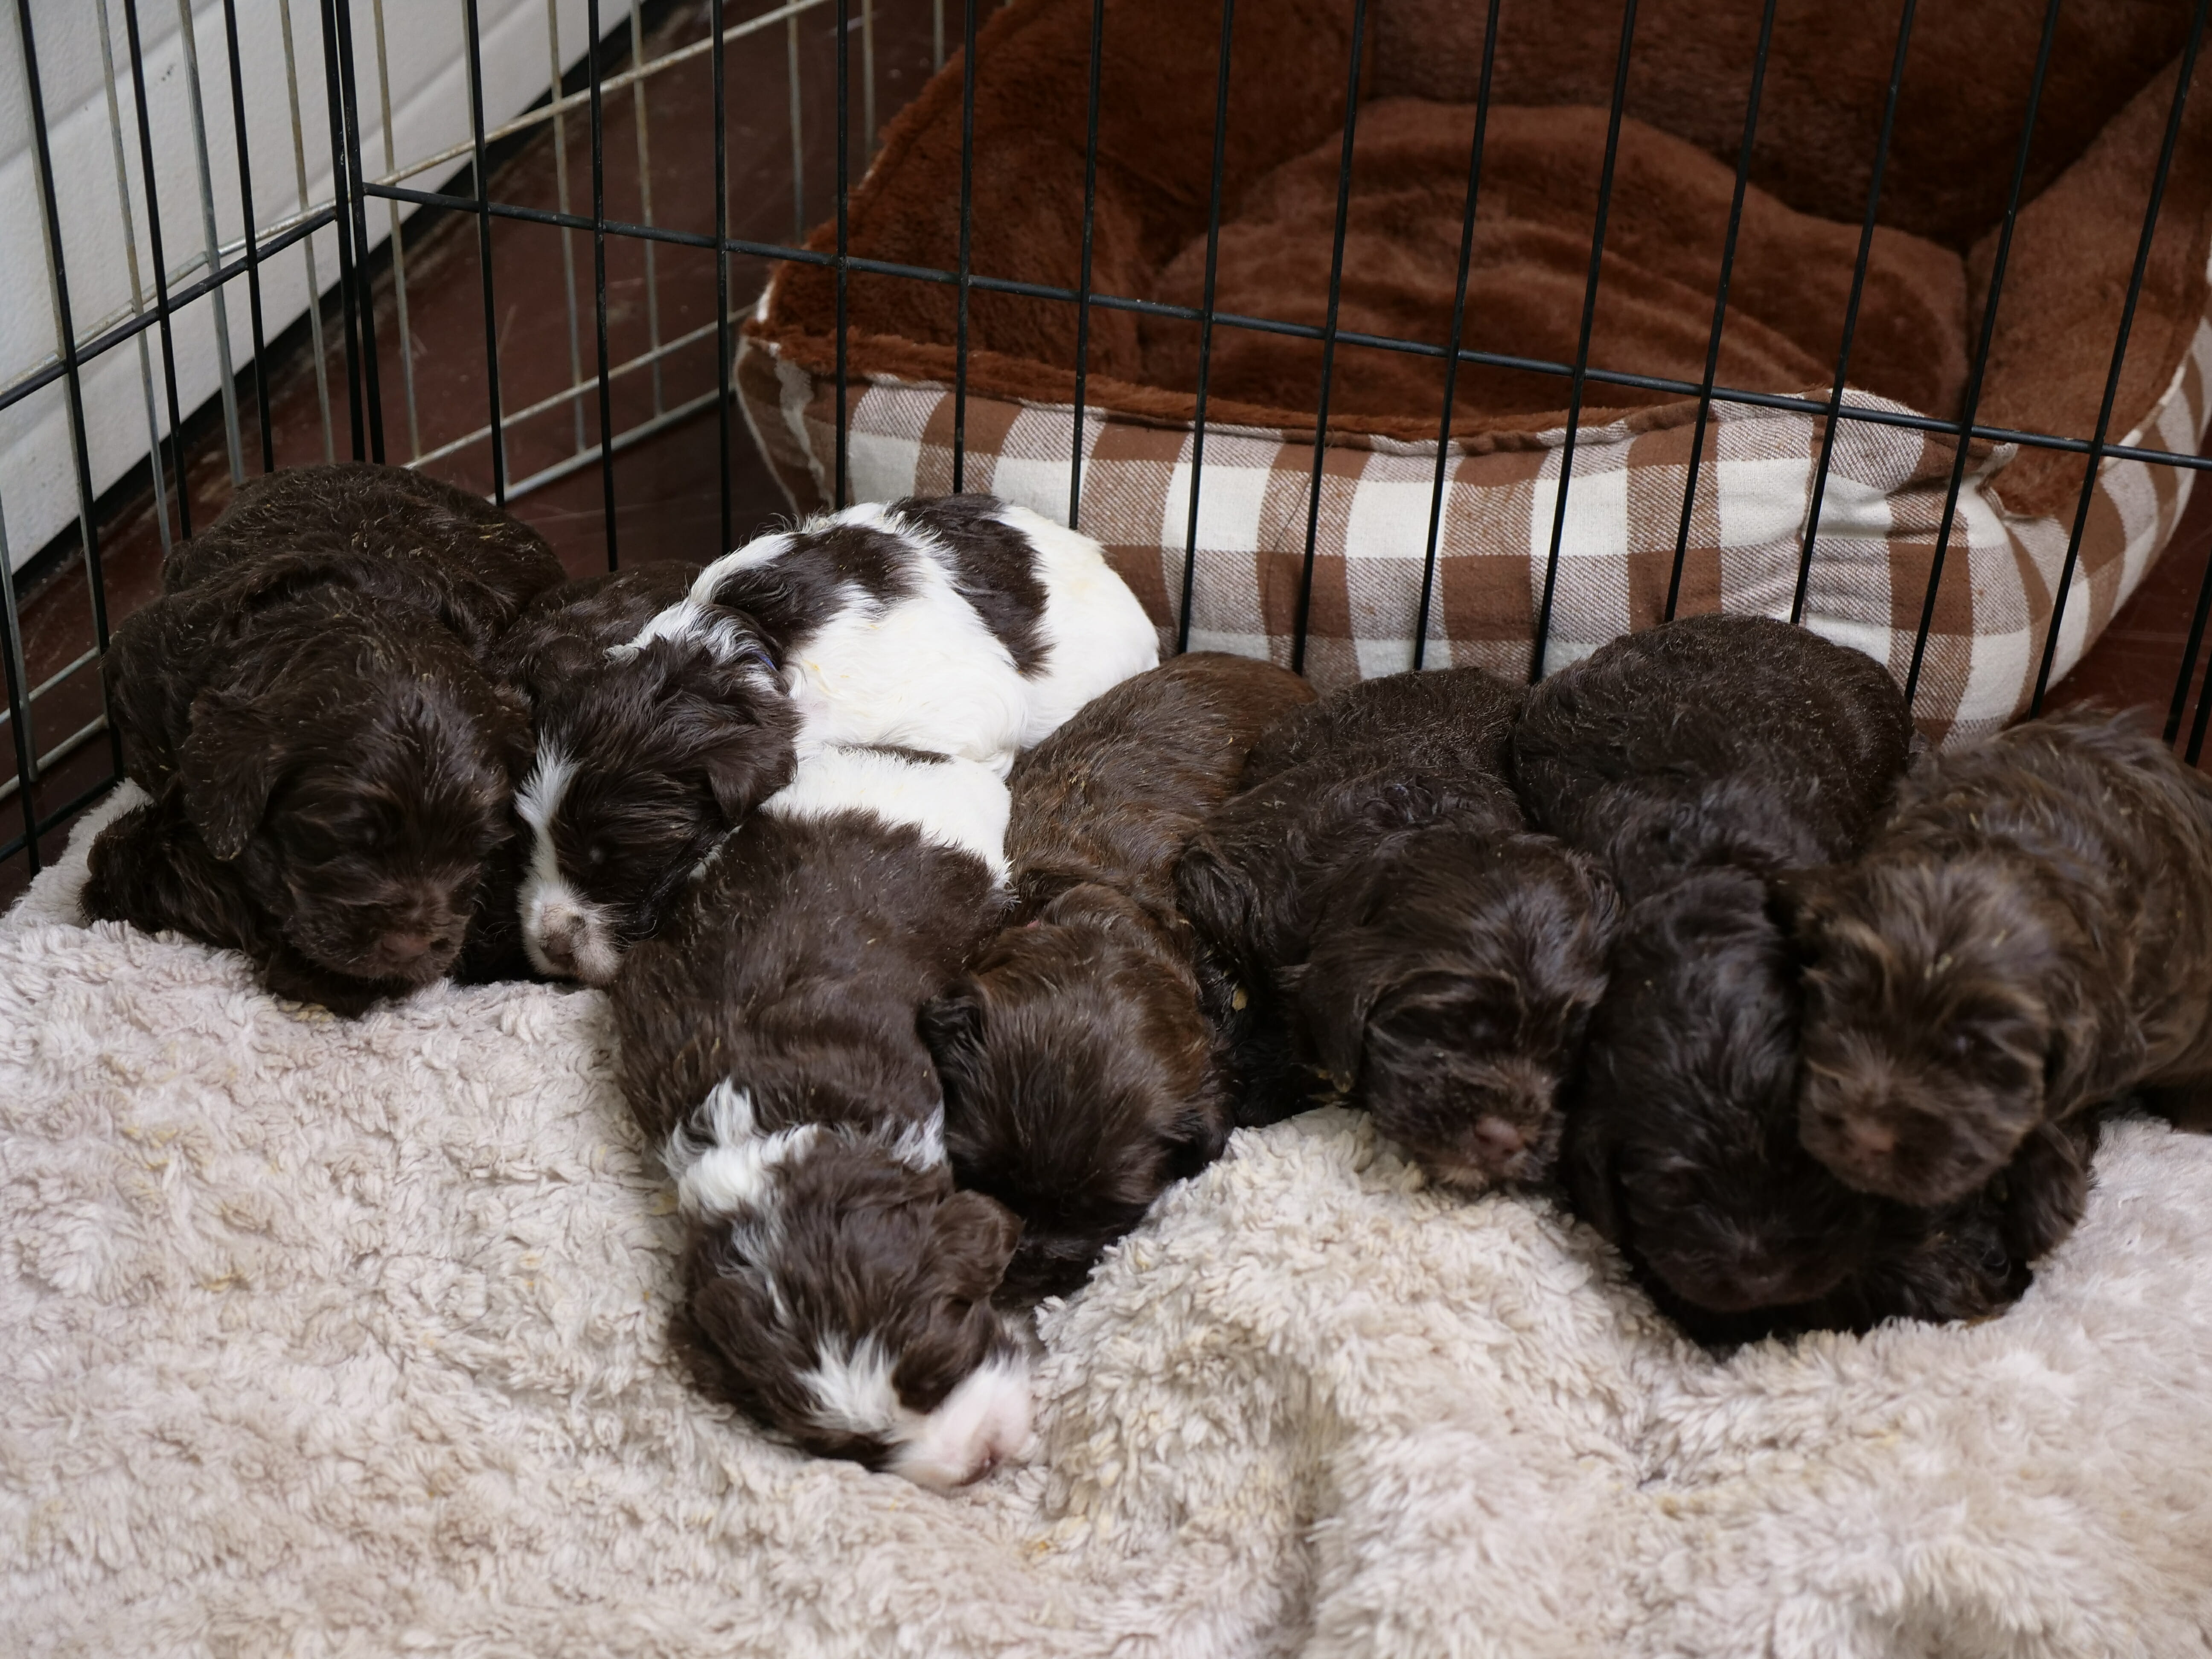 In the foreground is a light colored blanket, the background has a brown and white plaid dog bed inside a wire pen. Across the middle of the picture is a line up of sleeping 3-week old labradoodle puppies. From the left is a chocolate colored puppy, 2 parti pattern (white and chocolate) and then 4 chocolate colored puppies heads are visible.